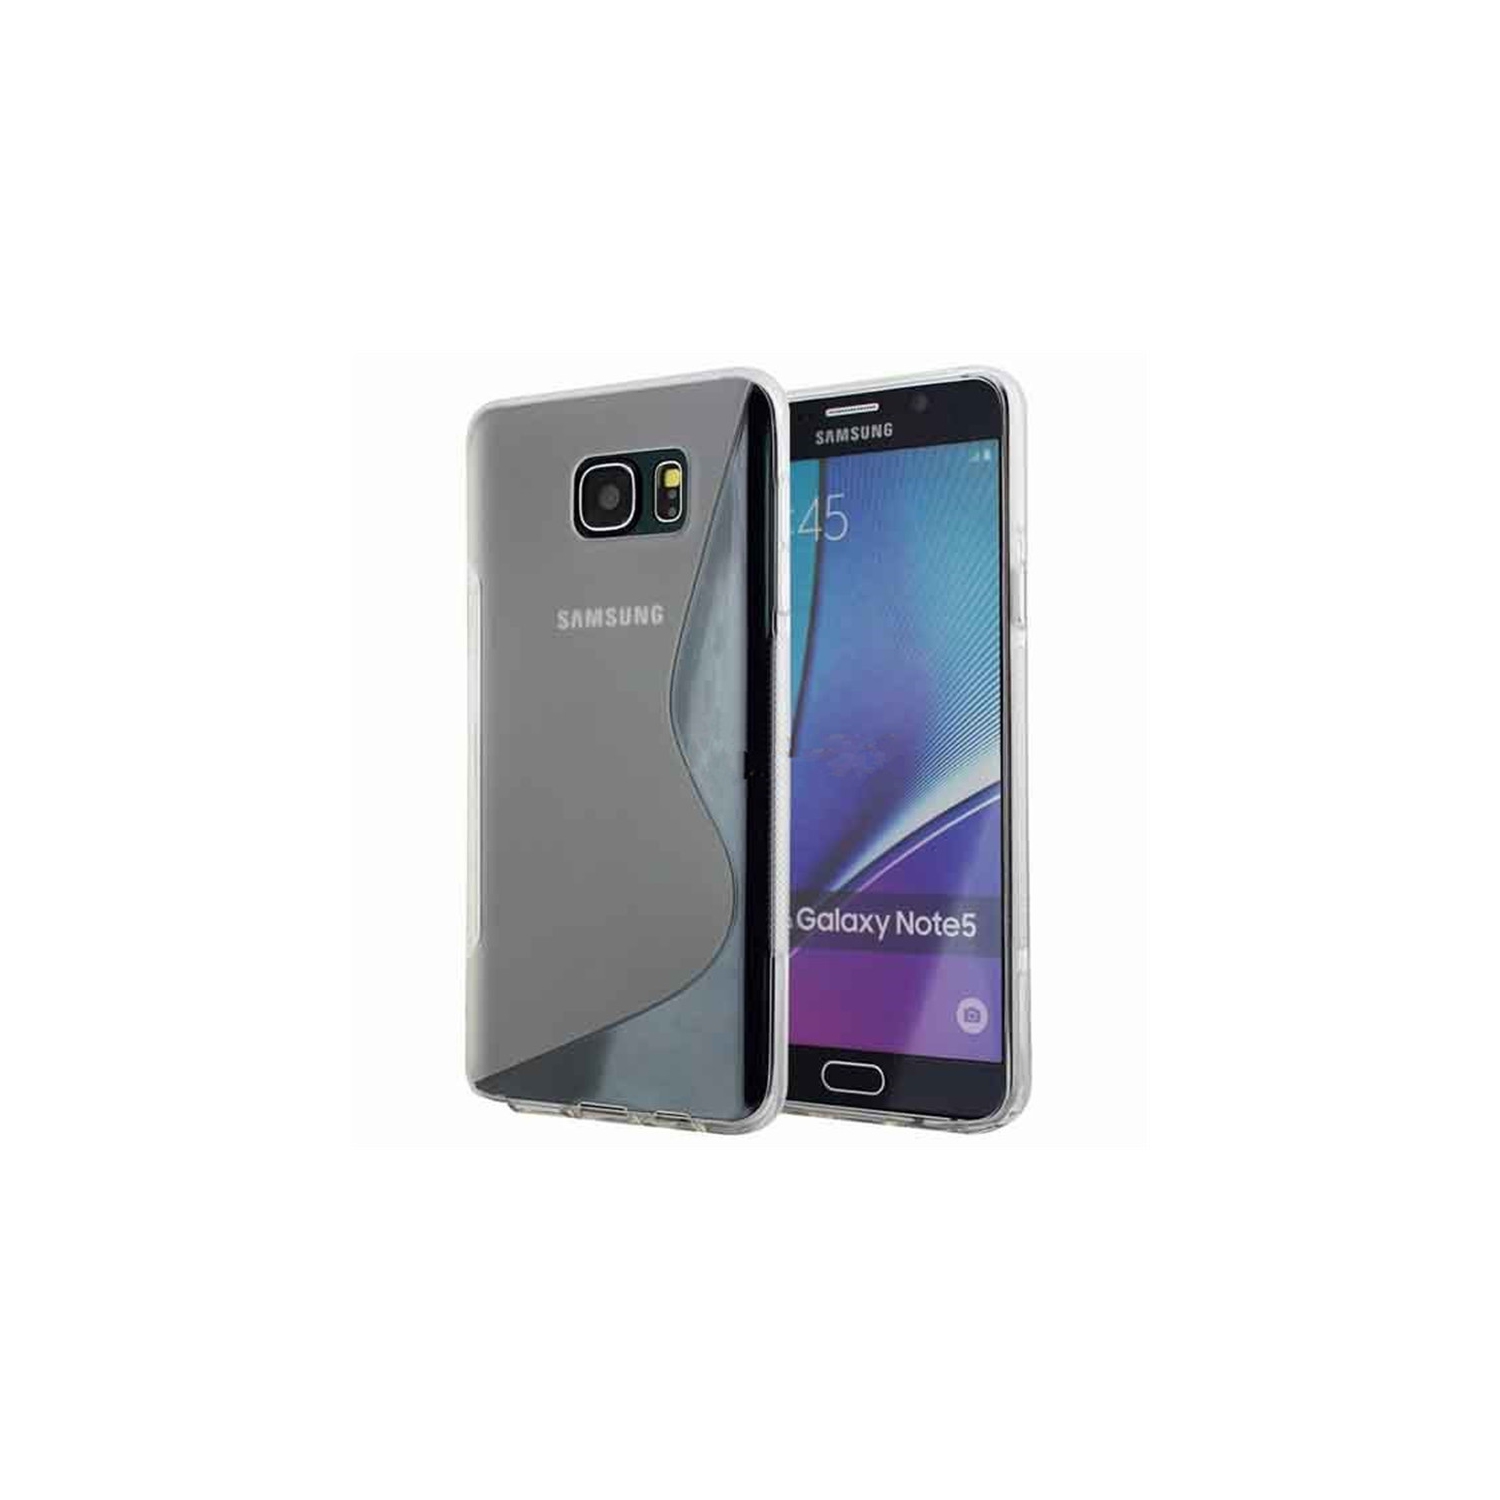 【CSmart】 Ultra Thin Soft TPU Silicone Jelly Bumper Back Cover Case for Samsung Note 5, Clear